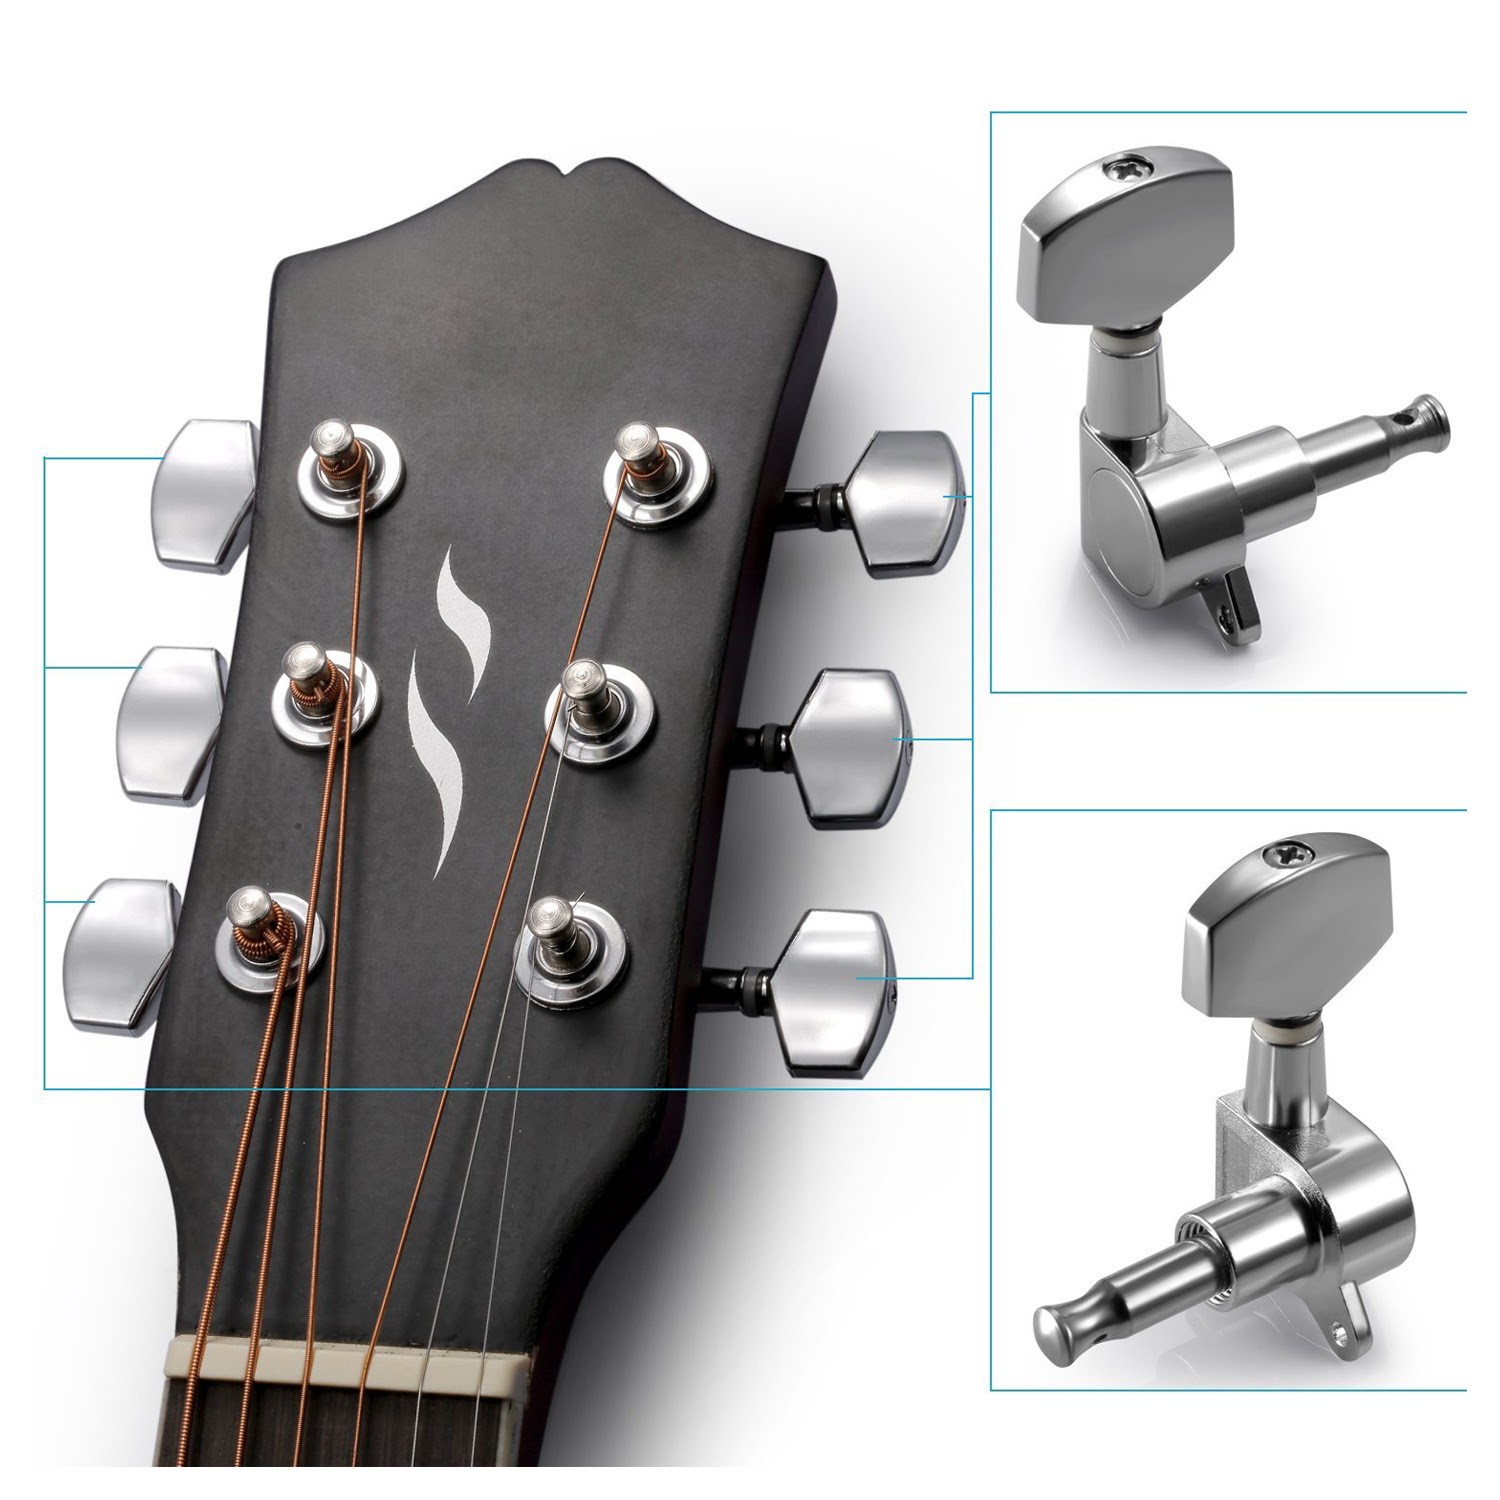 Almencla 6Pieces 3L 3R Guitar String Tuning Pegs Tuner Machine Heads Knobs Tuning Keys for Acoustic or Electric Guitar Black 